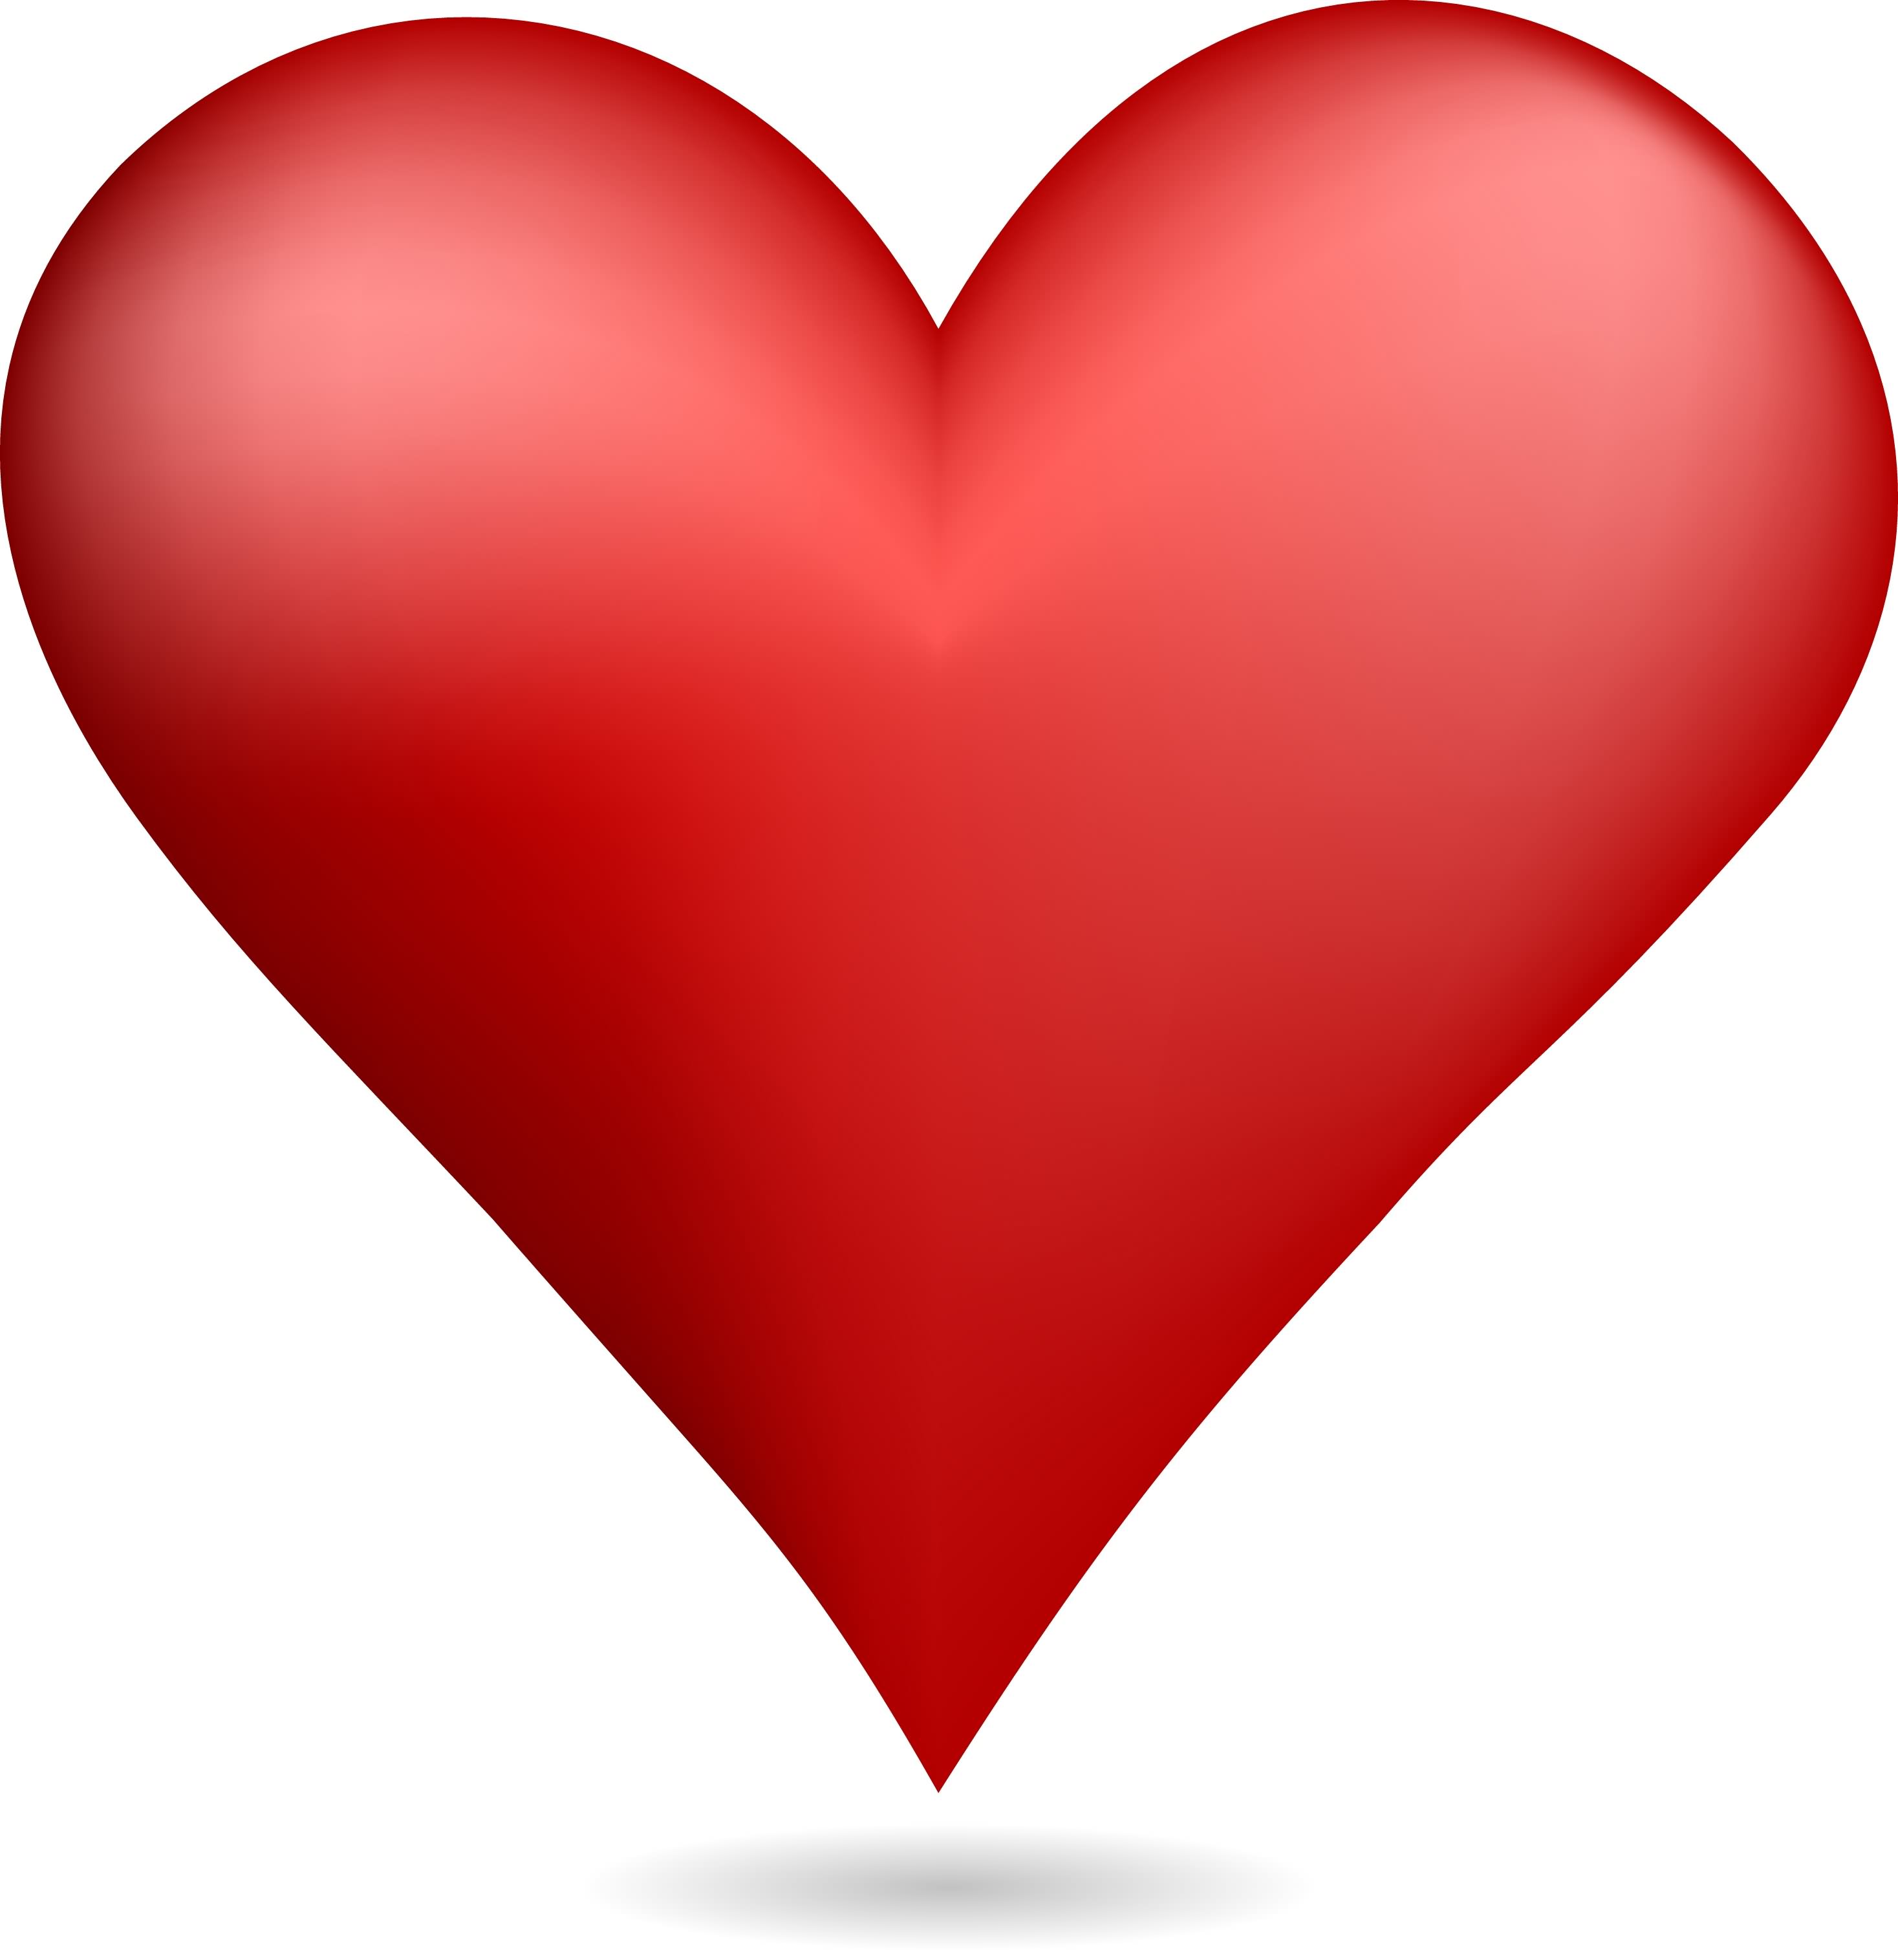 Red Heart Images ClipArt Best